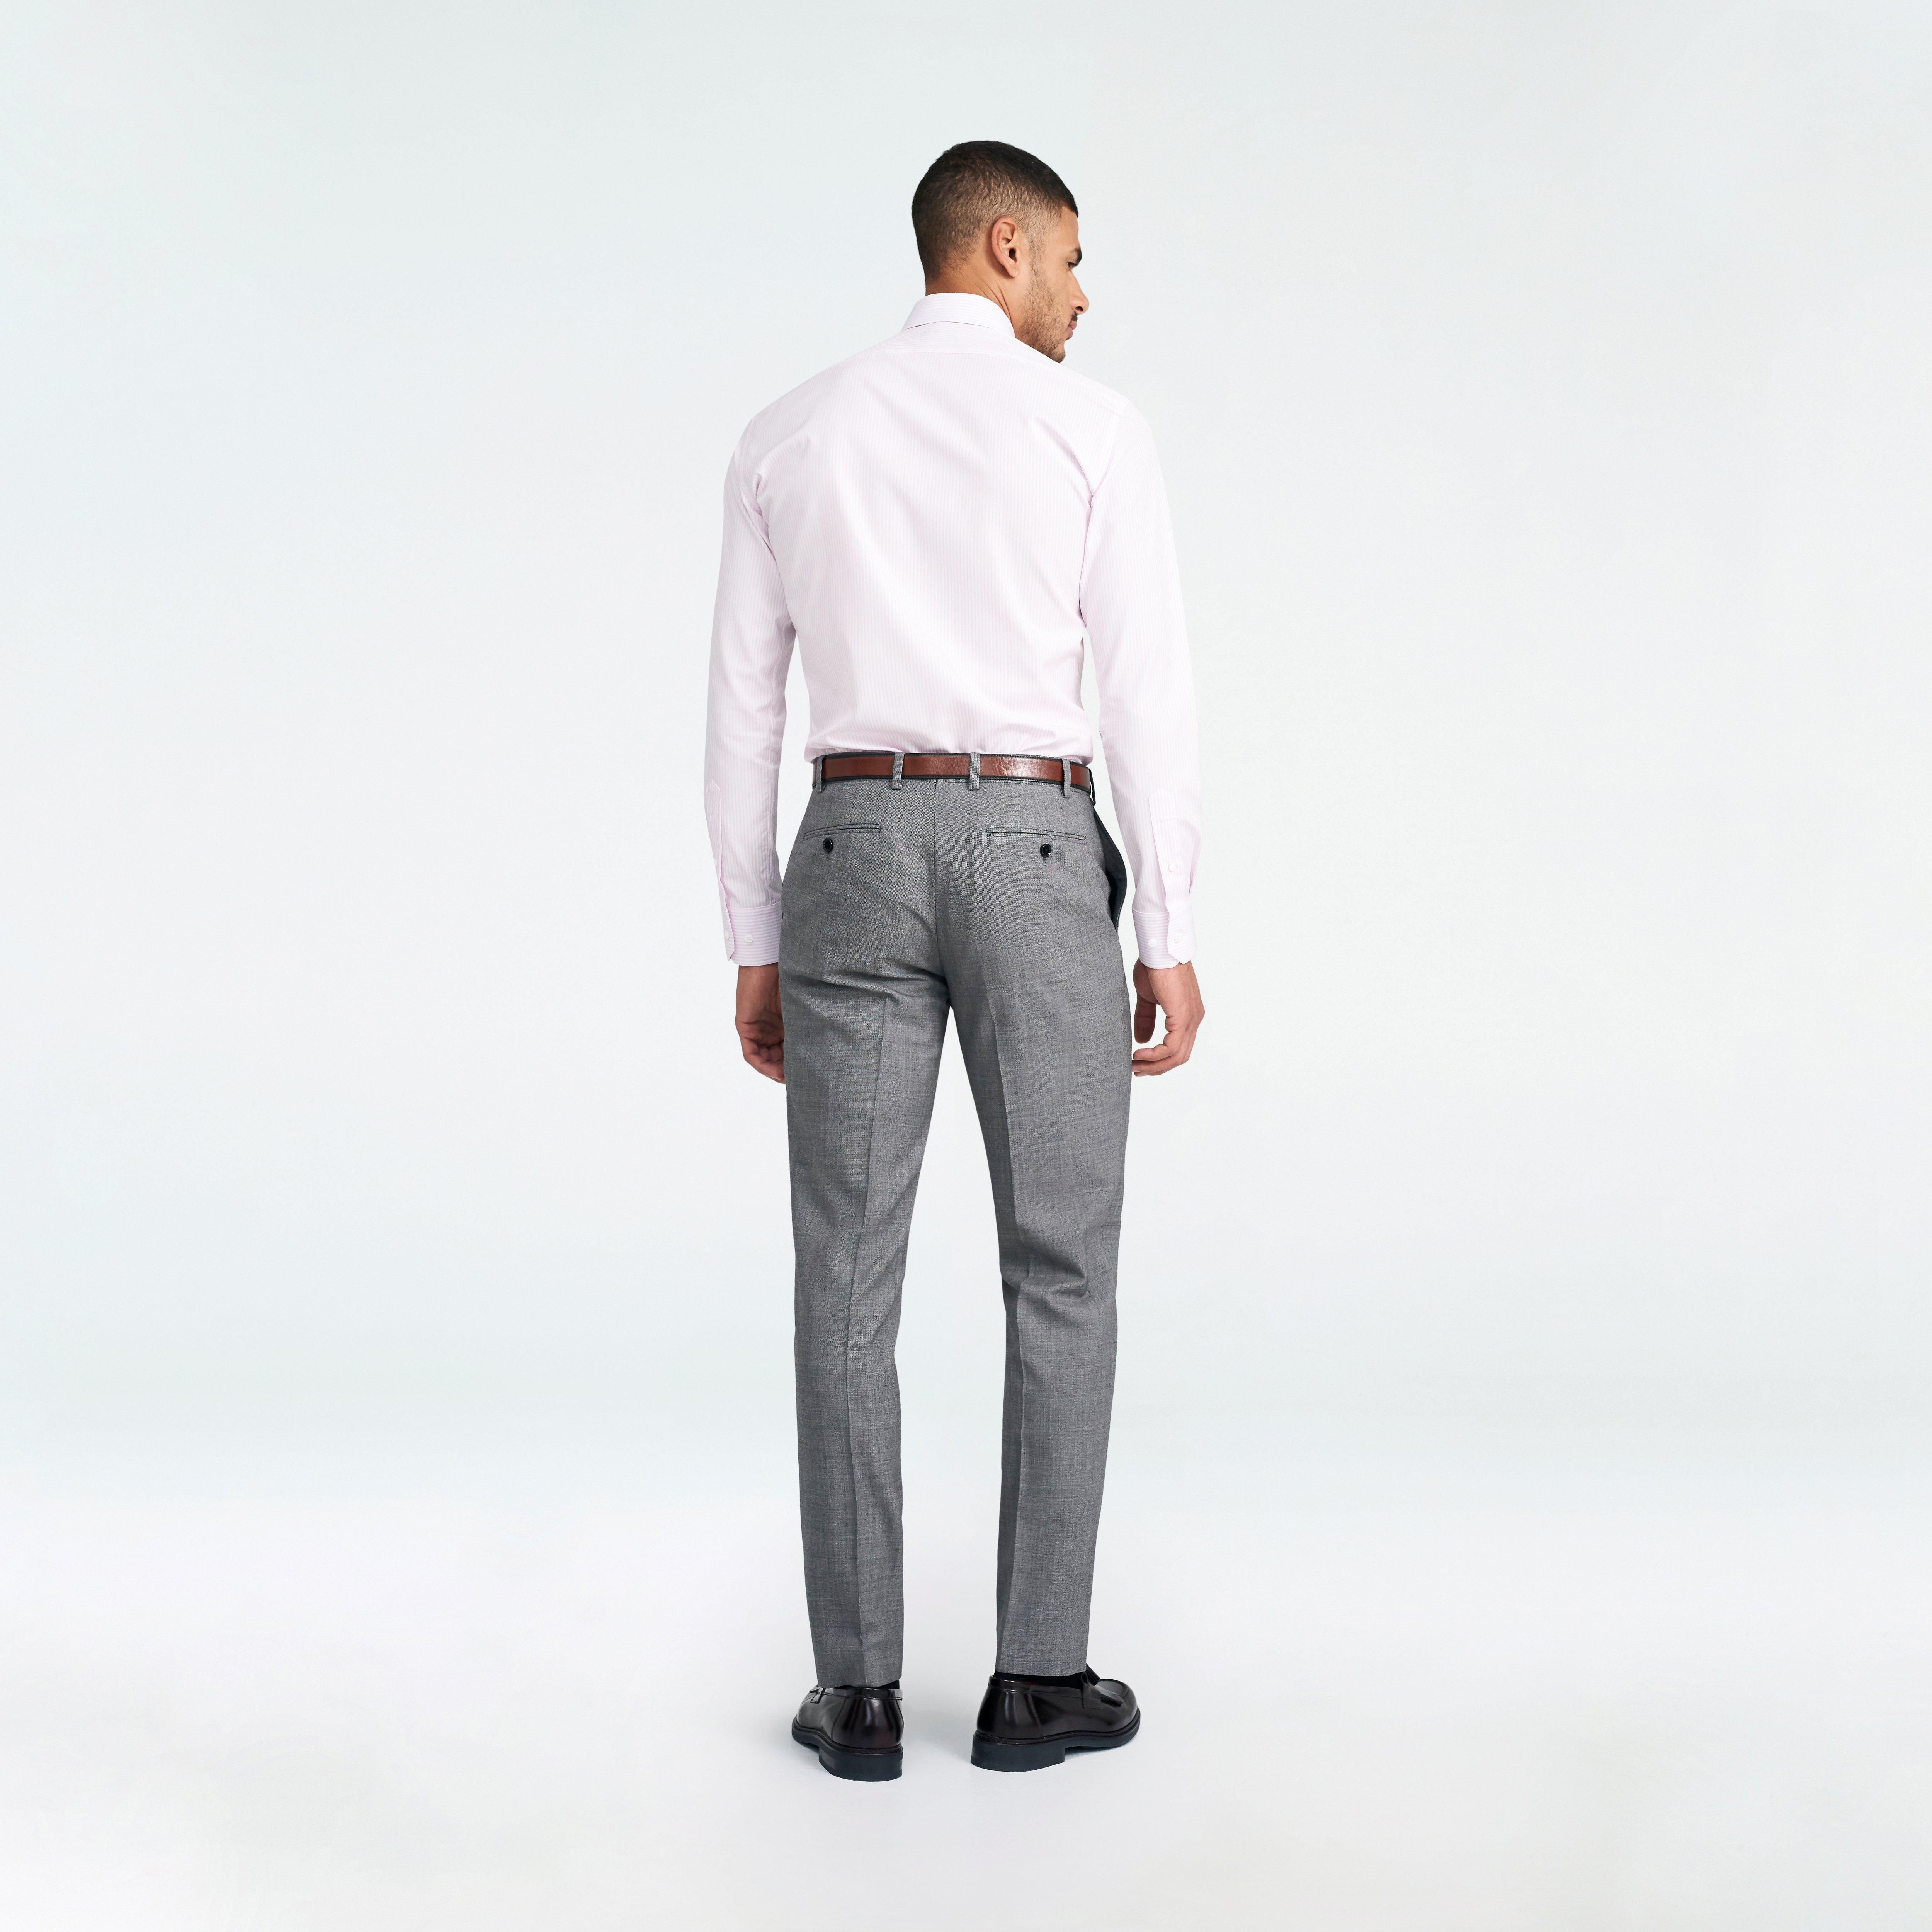 Custom Suits Made For You - Hayle Sharkskin Gray Suit | INDOCHINO